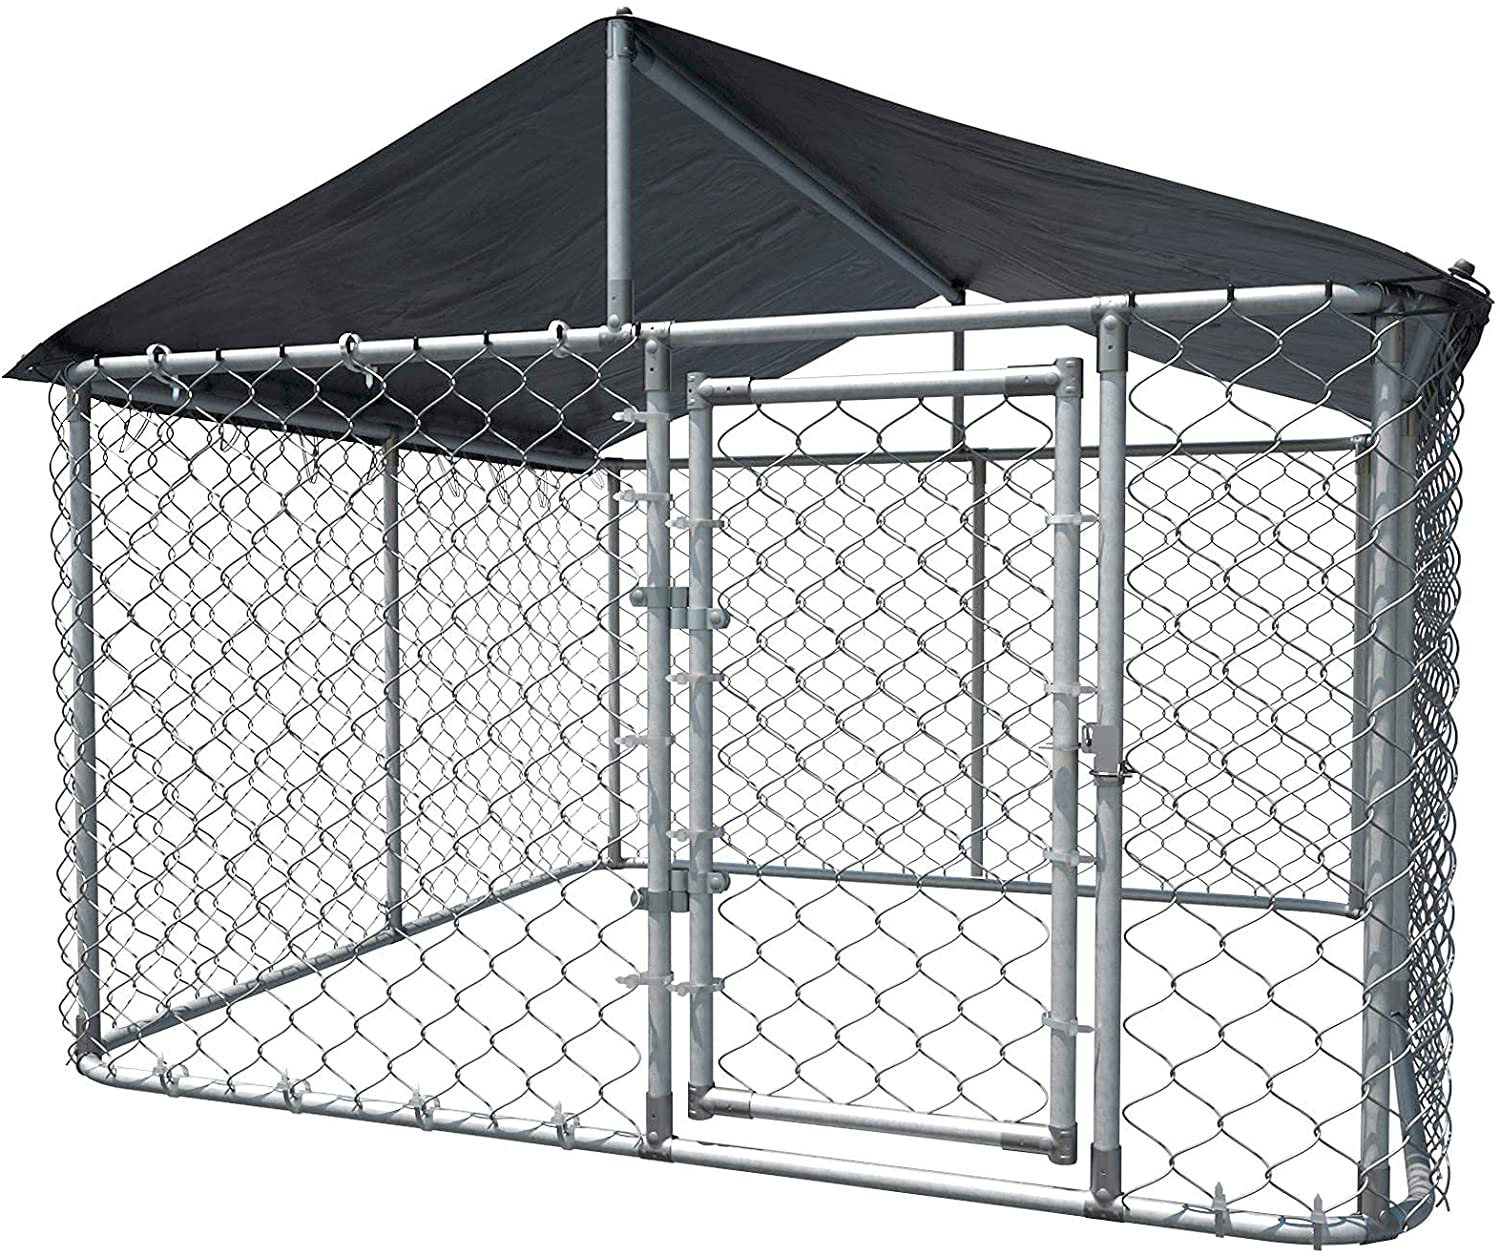 AKANORS Outdoor Chain Link Dog Kennel with Weatherproof Cover - Large Heavy Duty Pet House Run Exercise Playpen for Training - Chicken Coop Hen Cage Durable Galvanized Steel Frame